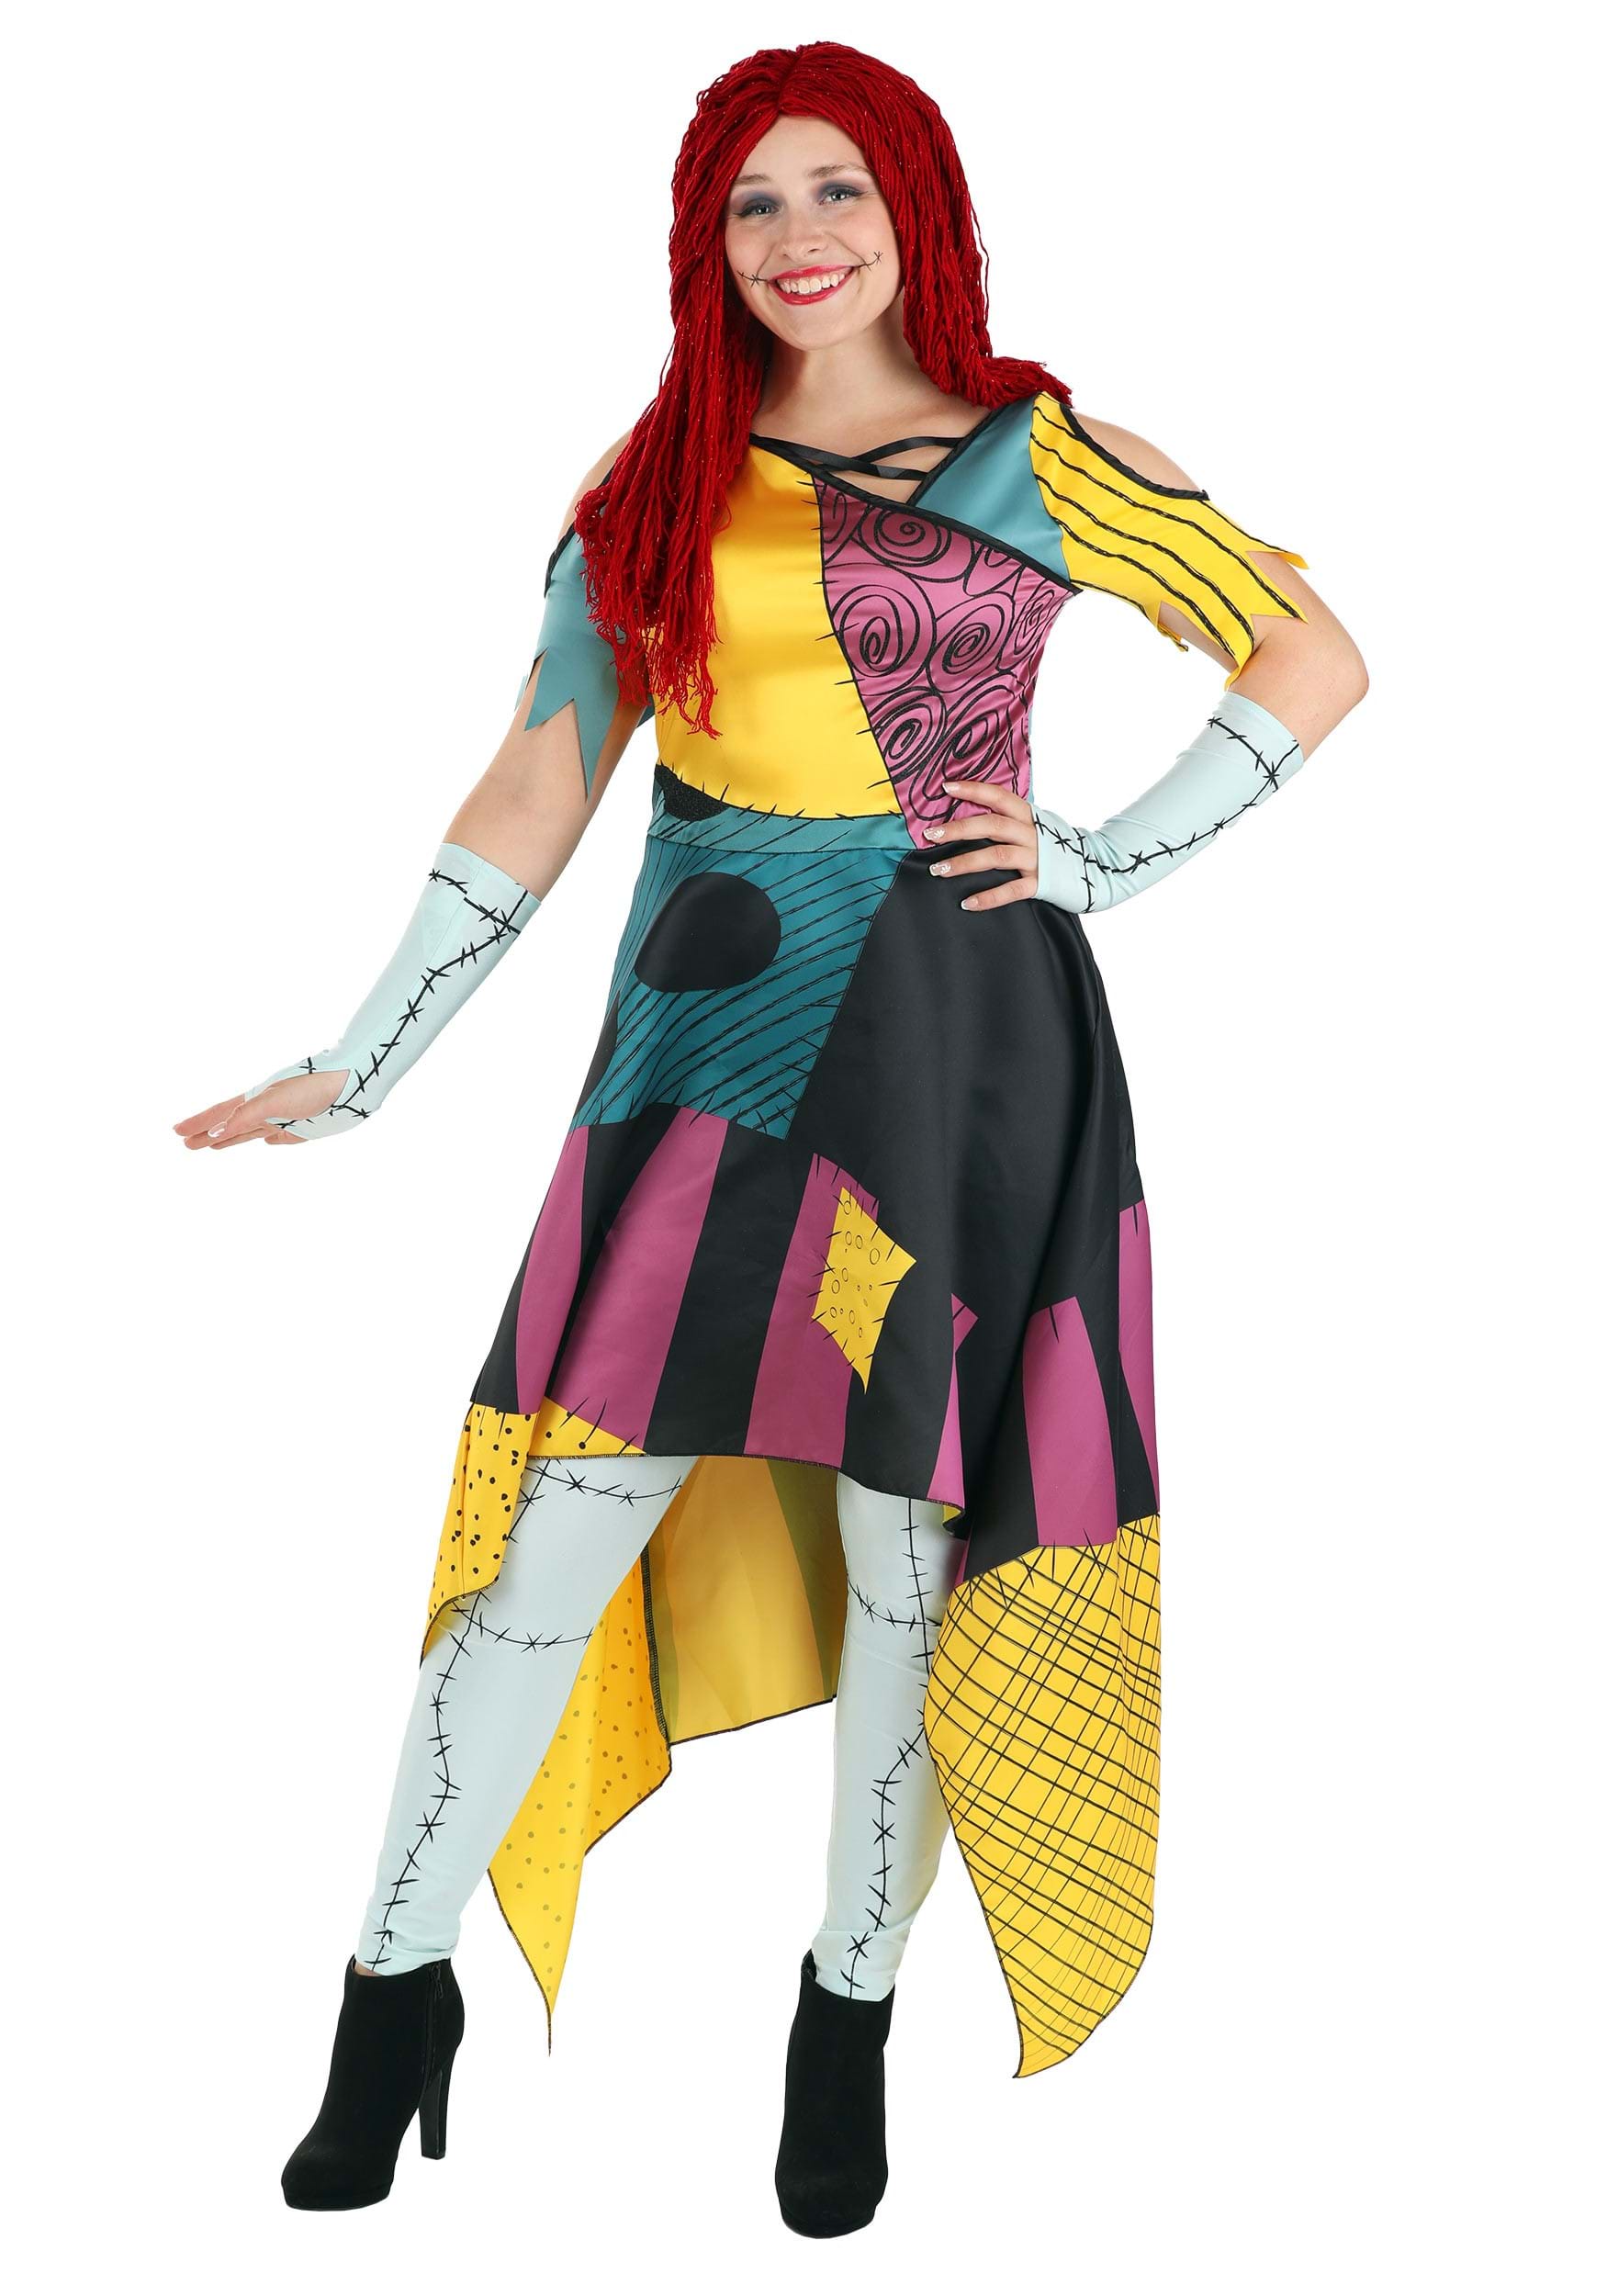 Image of Sally Prestige Adult Costume from Nightmare Before Christmas ID DI21598-XL